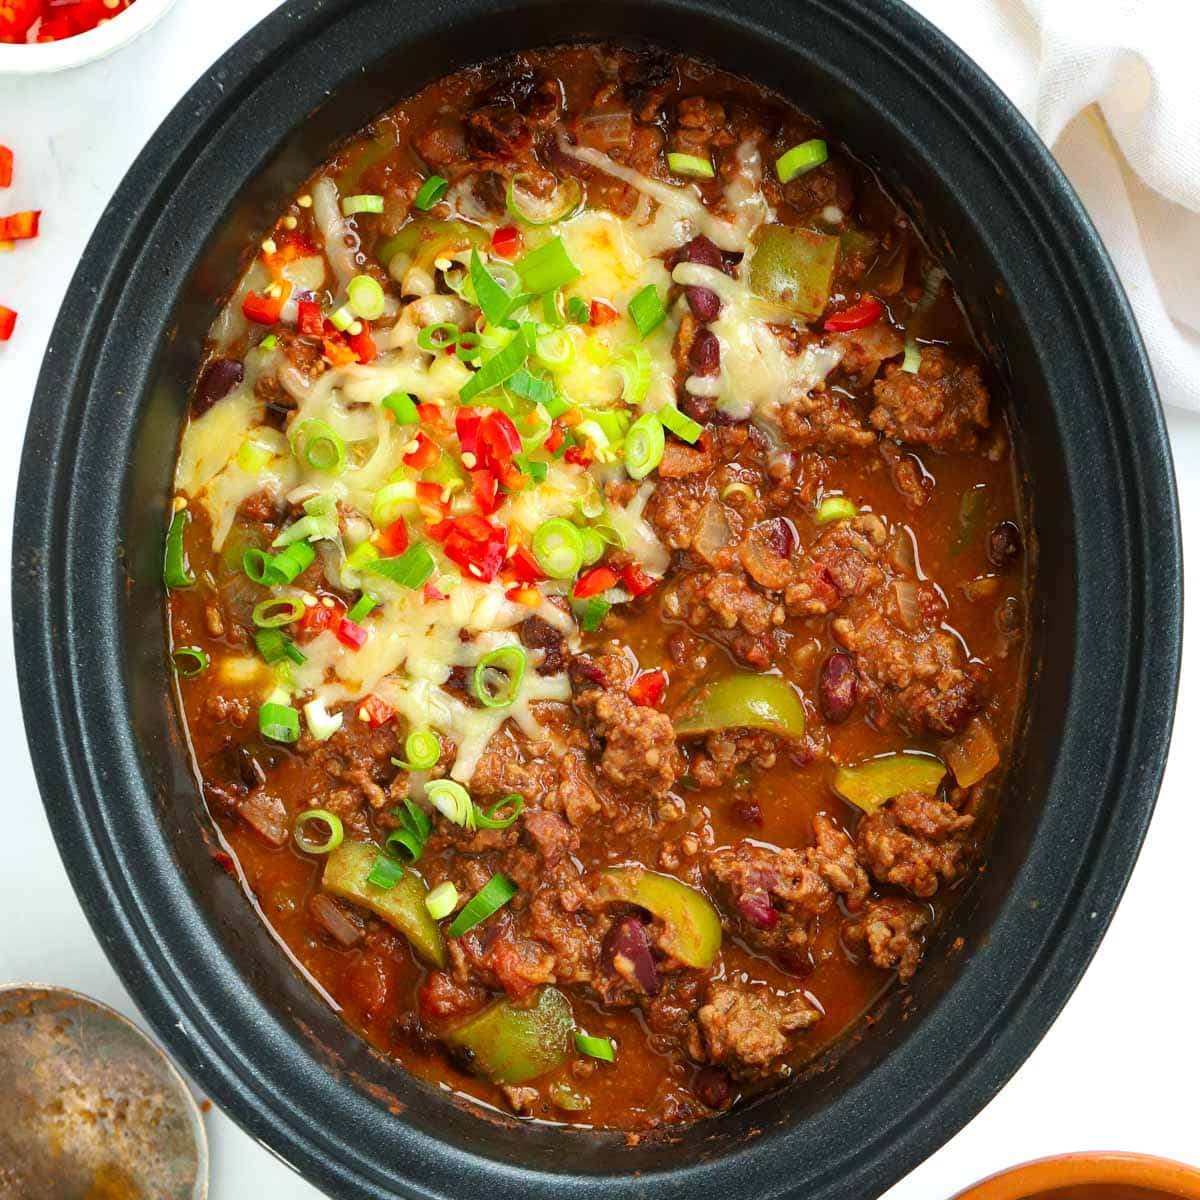 https://www.tamingtwins.com/wp-content/uploads/2022/09/slow-cooker-chilli-con-carne-4.jpg